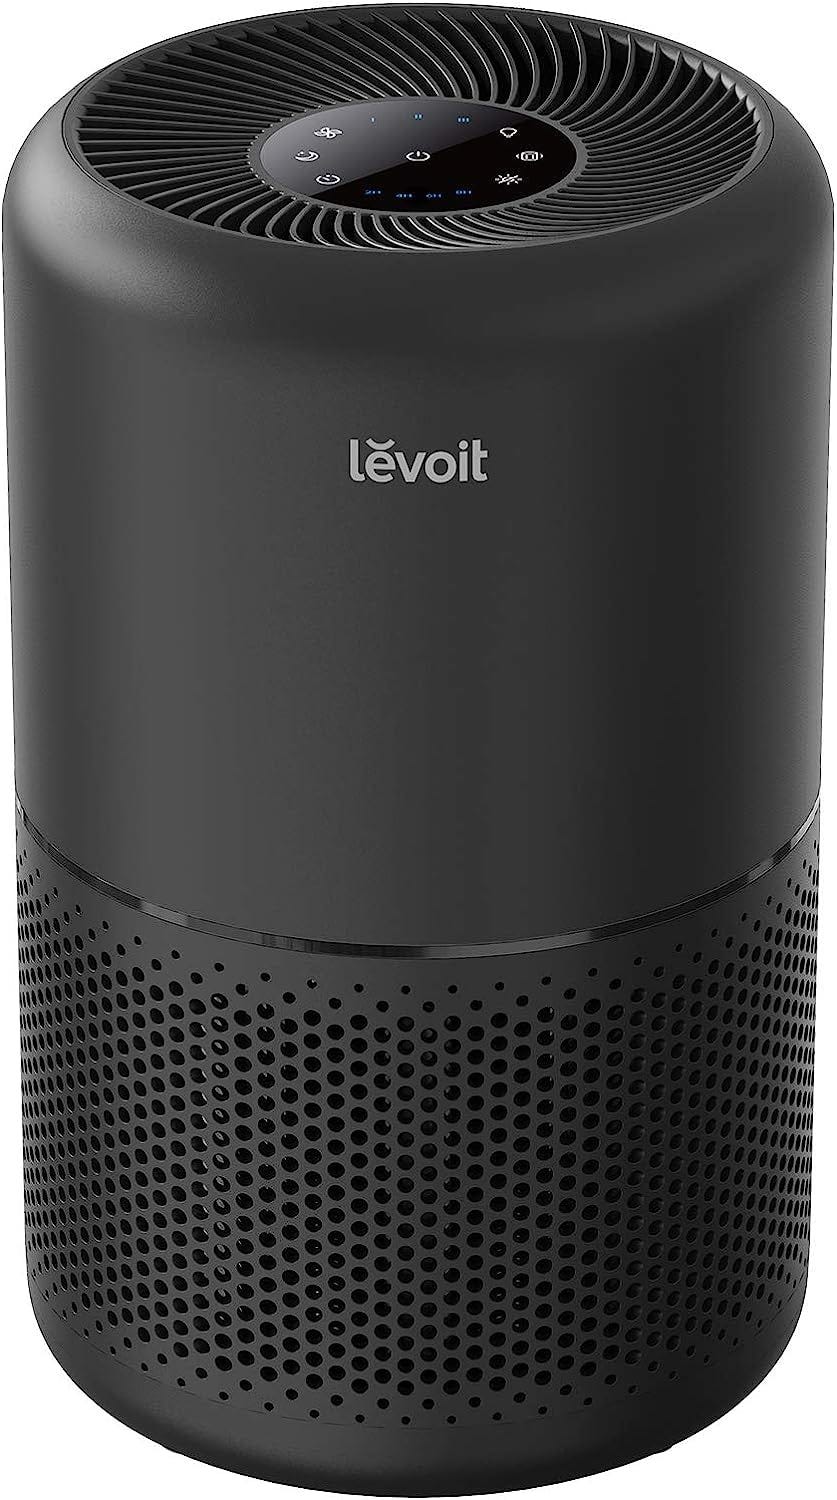 Amazon.com: LEVOIT Air Purifier for Home Allergies Pets Hair in Bedroom,  Covers Up to 1095 Sq.Foot Powered by 45W High Torque Motor, 3-in-1 Filter,  Remove Dust Smoke Pollutants Odor, Core300-P, Black :